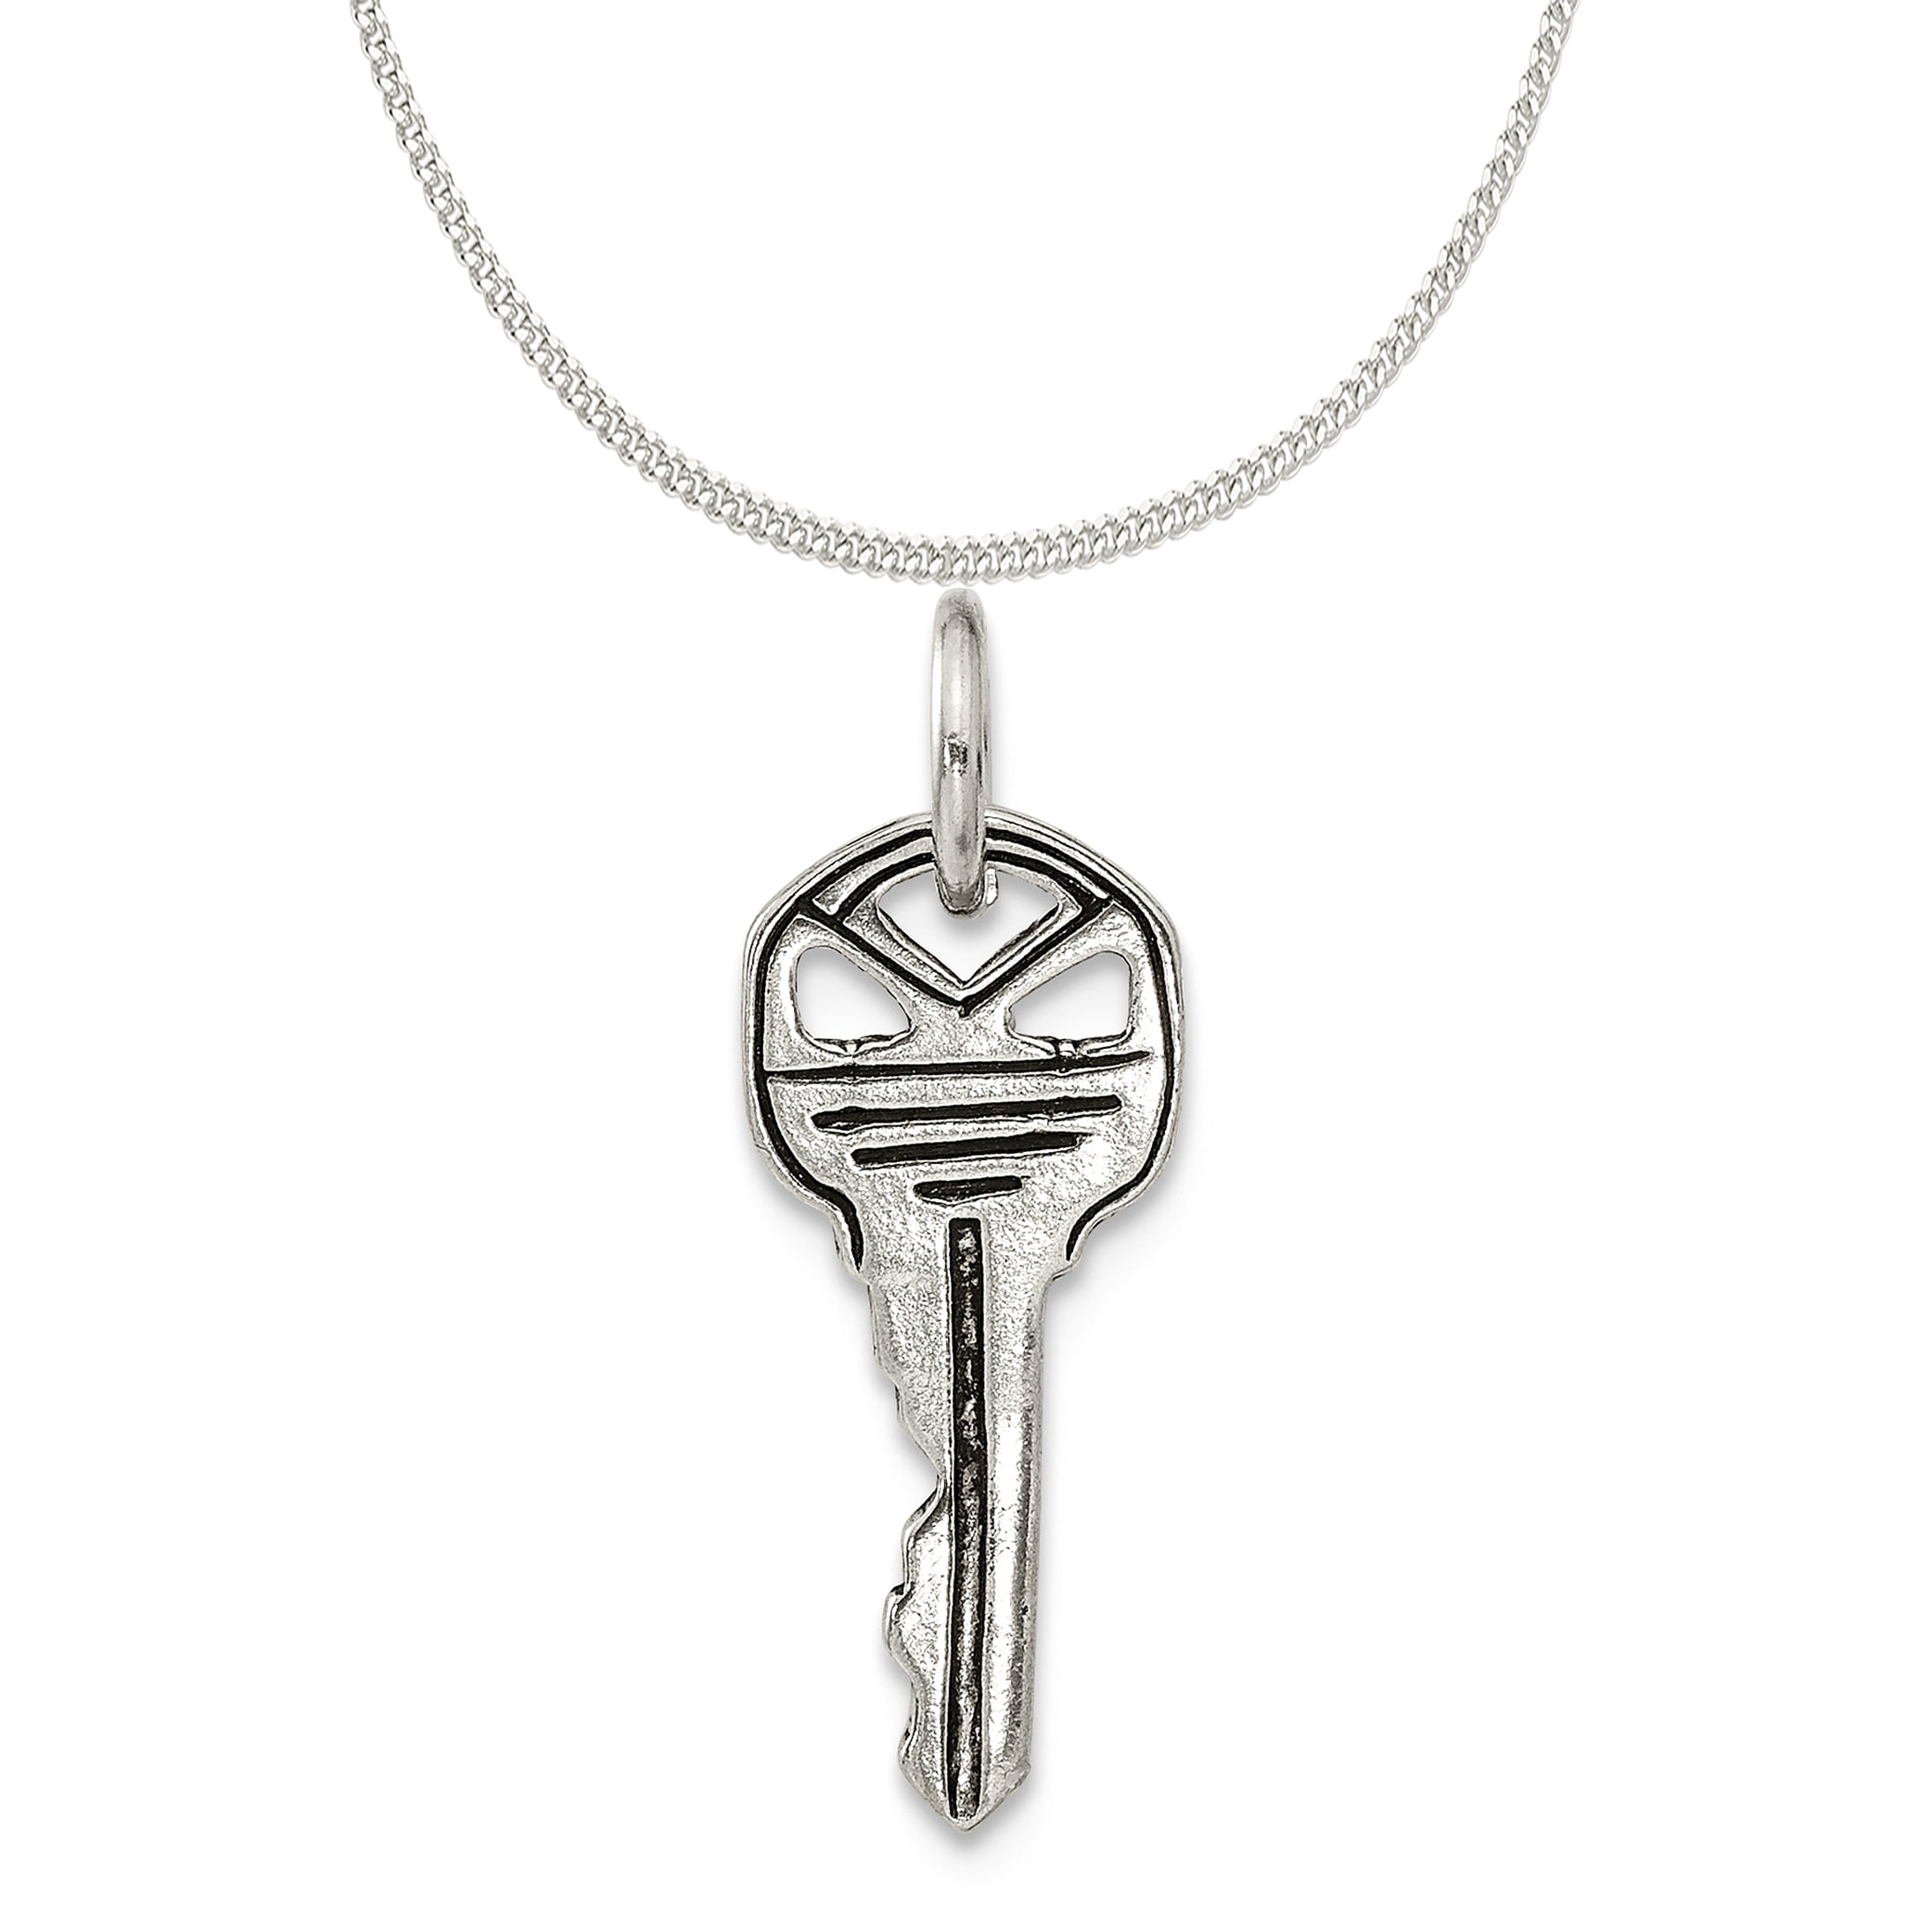 16 in-20 in Sterling Silver Antiqued Key Charm on a Sterling Silver Chain Necklace